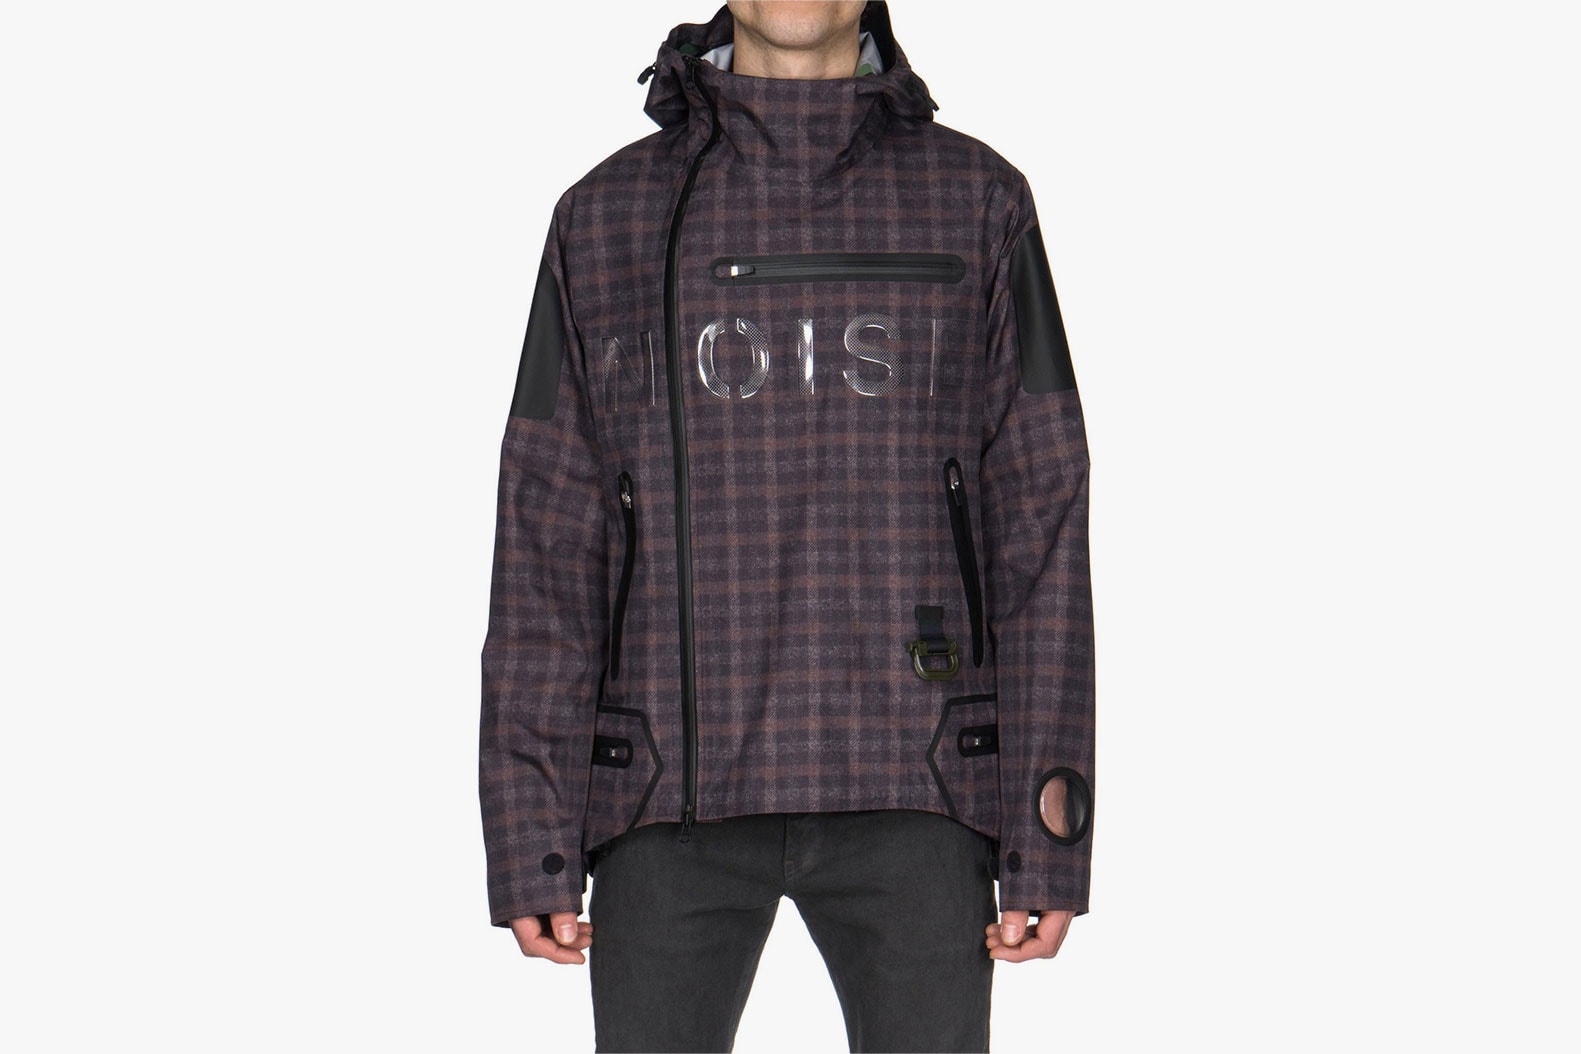 UNDERCOVER NOISE Blouson Spring Summer 2018 Outerwear UCU4202-1 noise release waterproof check purchase price